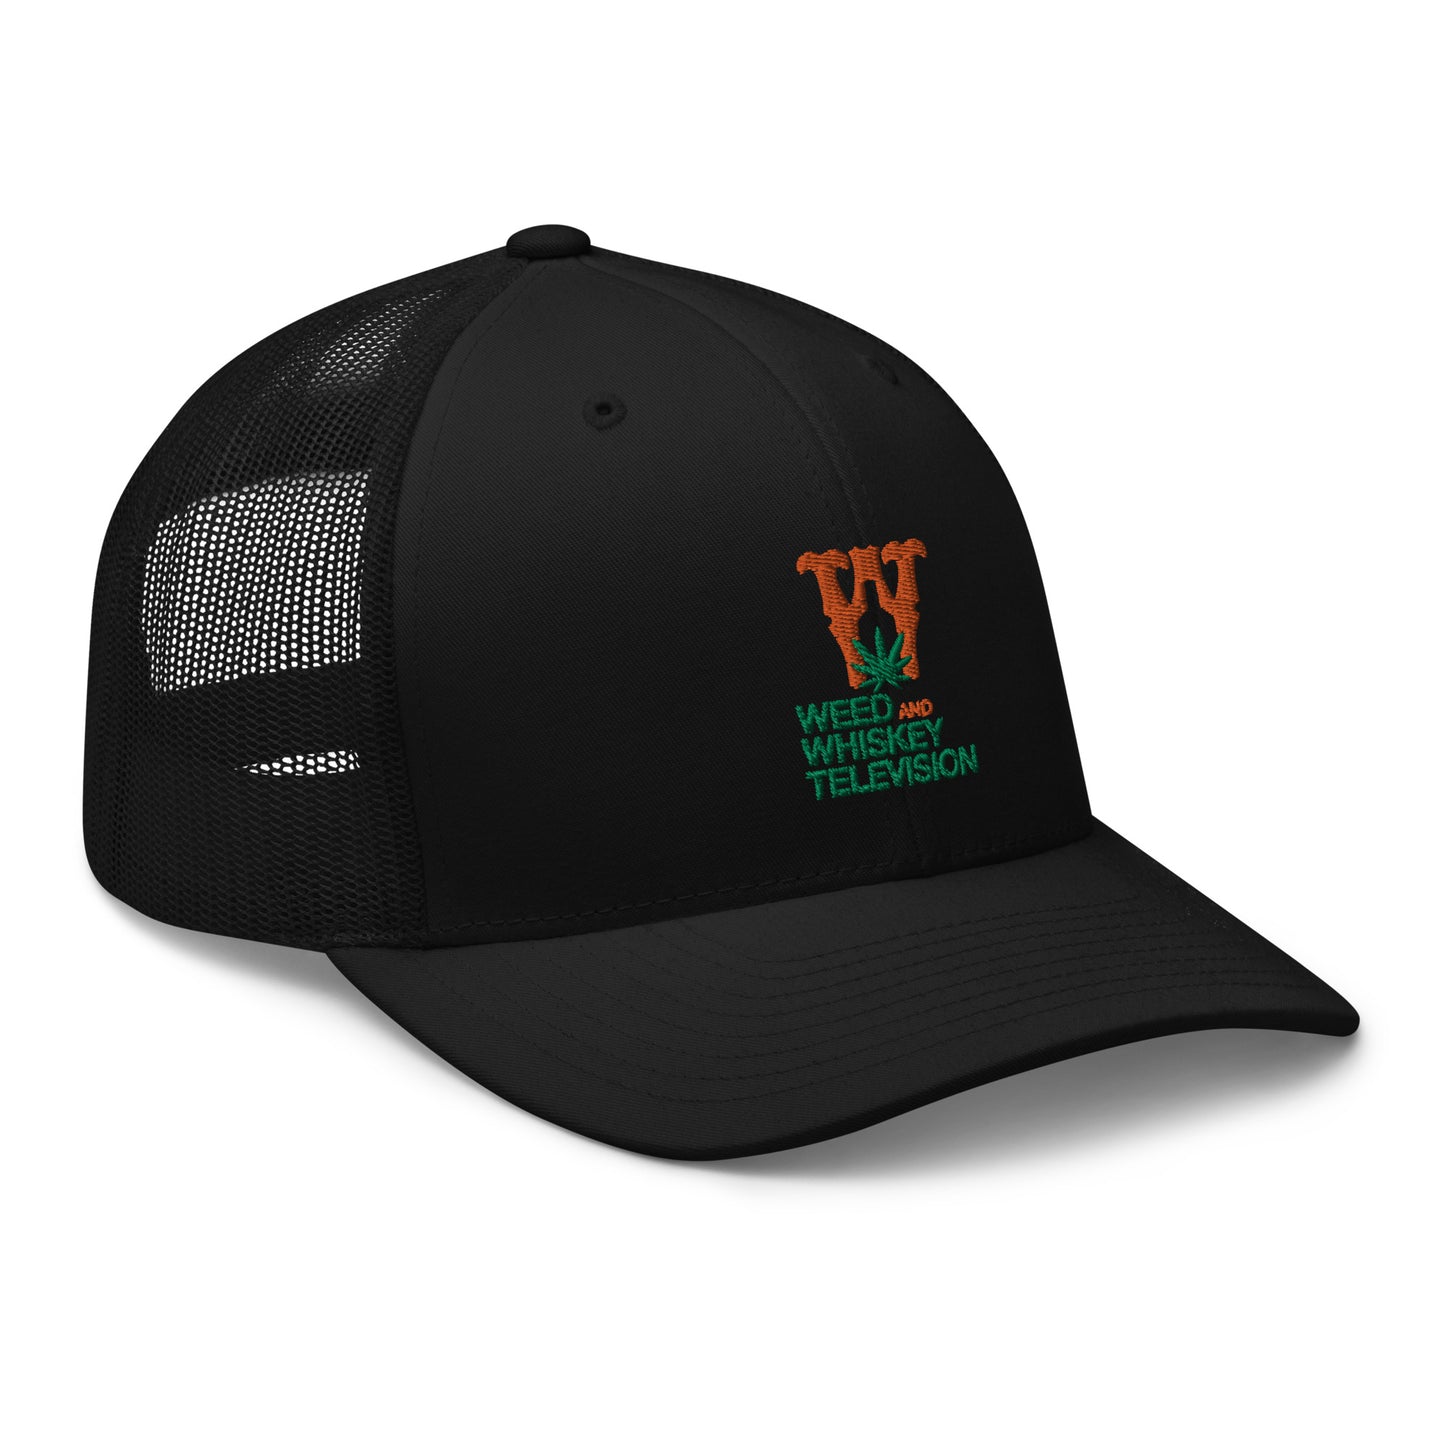 Weed And Whiskey Television Trucker